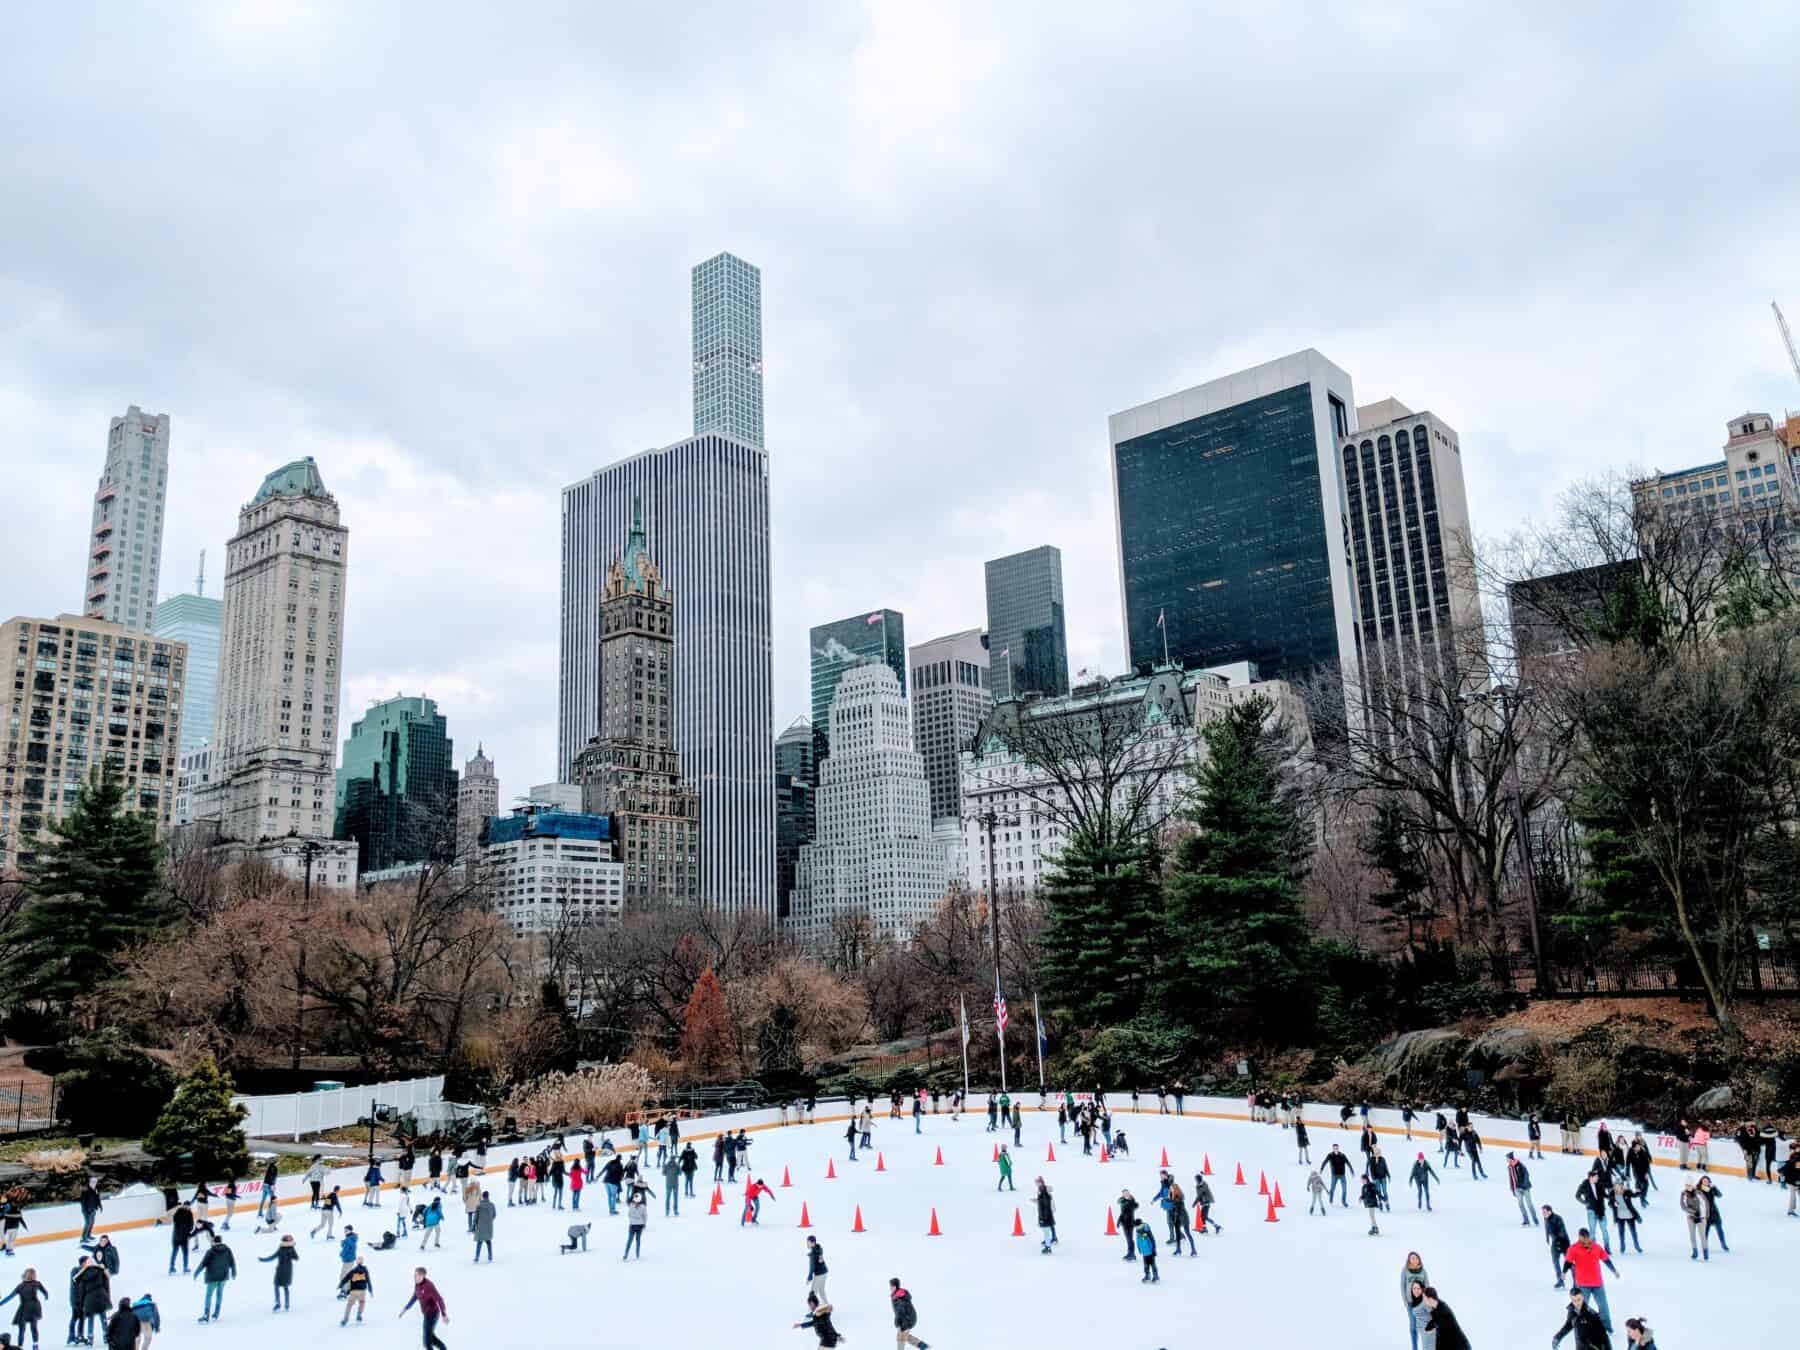 people ice skating outdoors surrounded by tall buildings